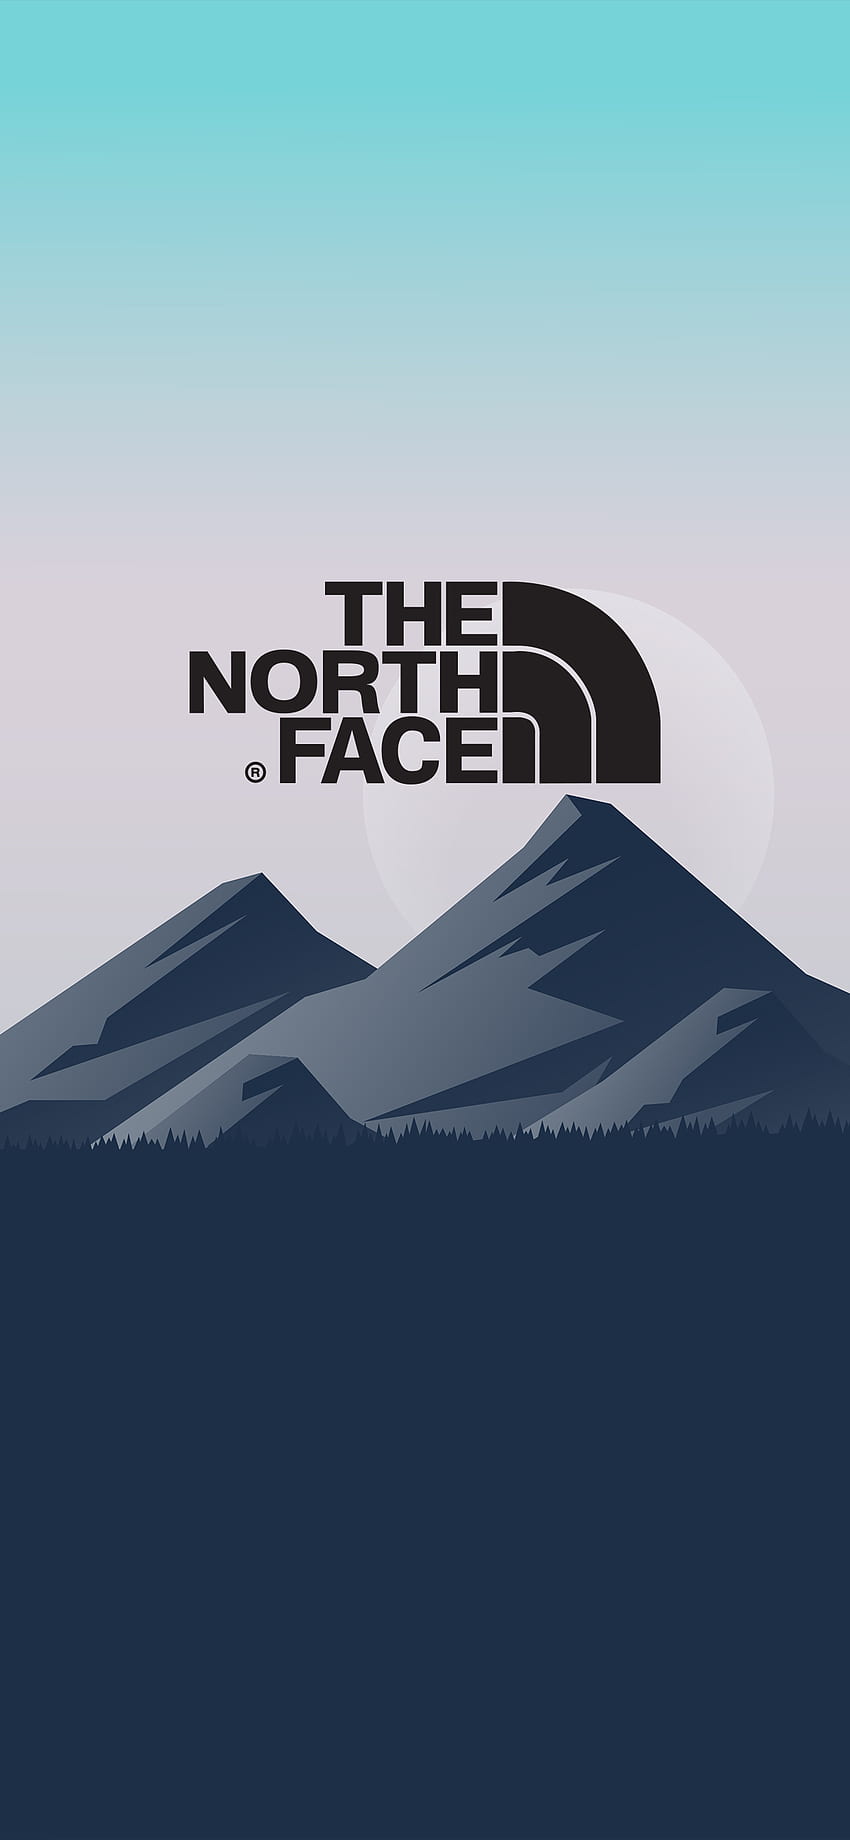 THE NORTH FACE BACKGROUND, North Face Aesthetic HD phone wallpaper